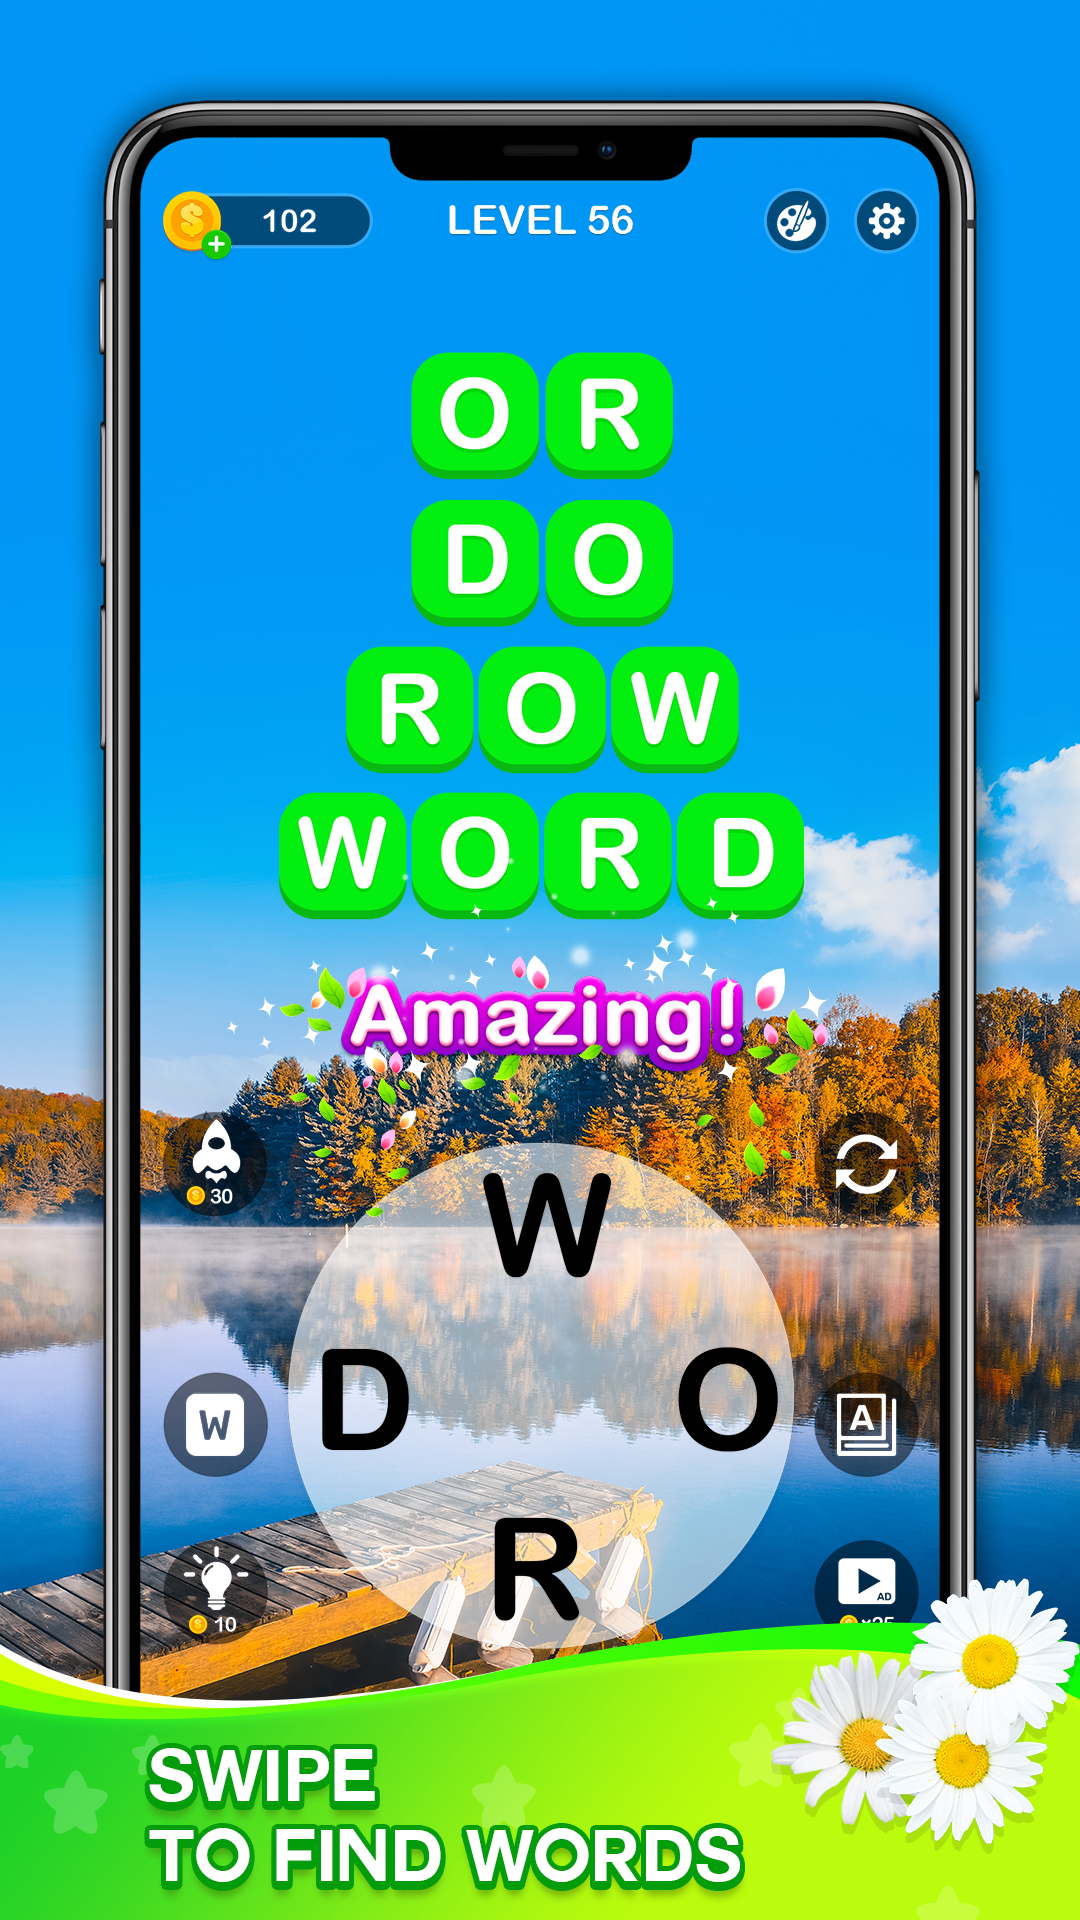 Play Word Connect - Train Brain Online